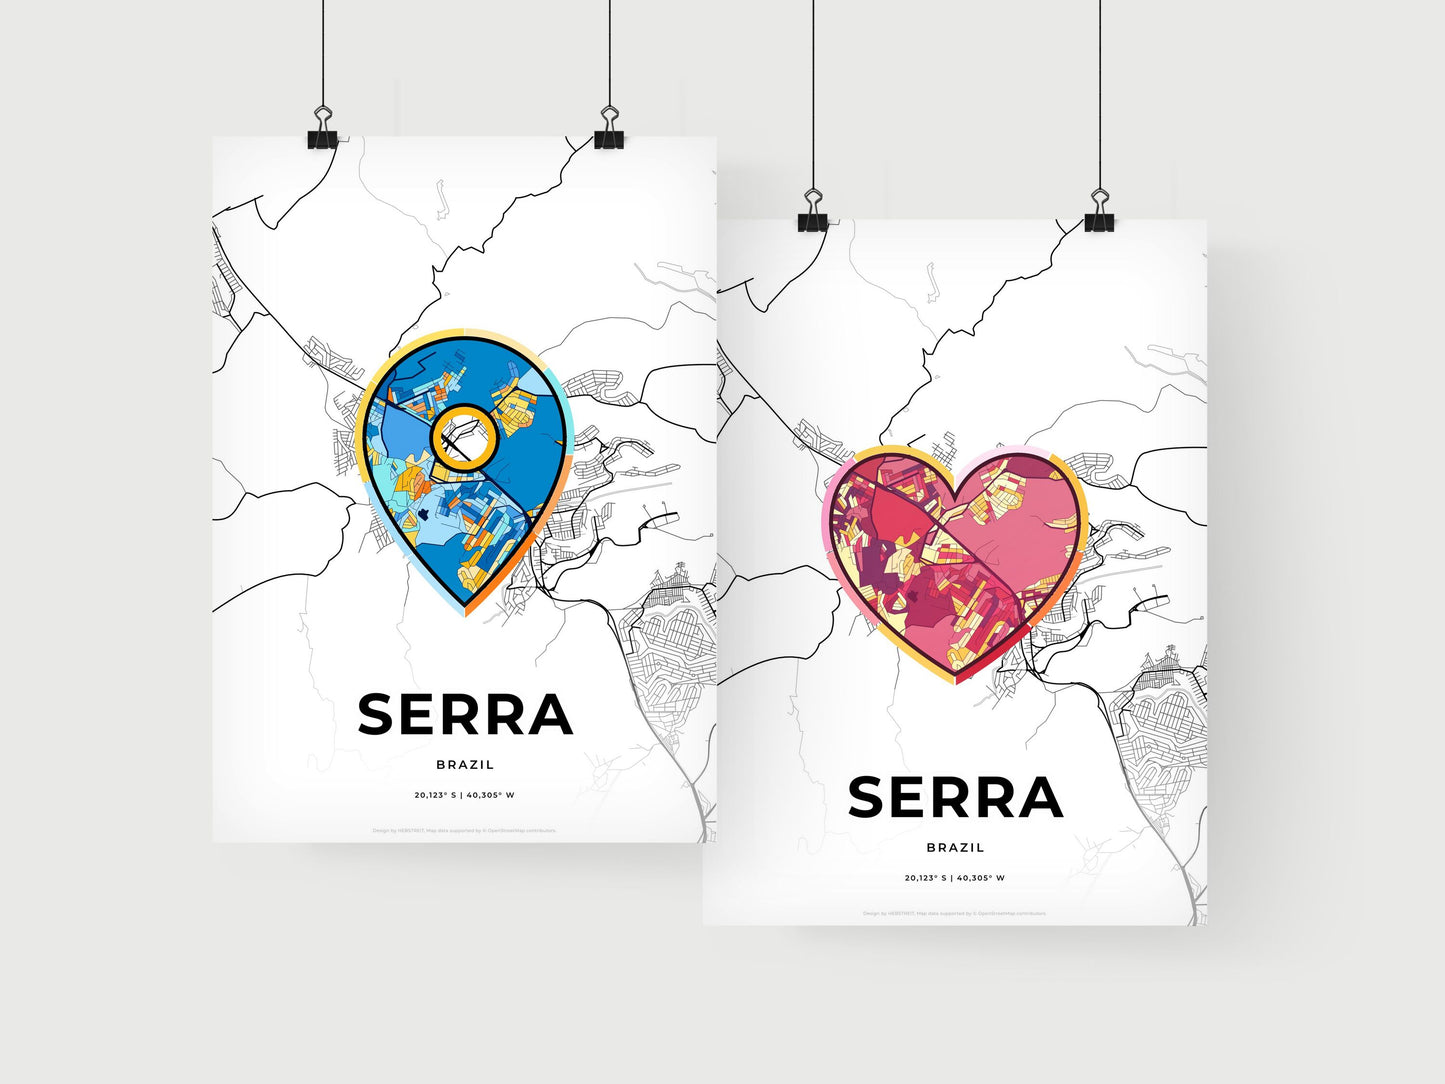 SERRA BRAZIL minimal art map with a colorful icon.